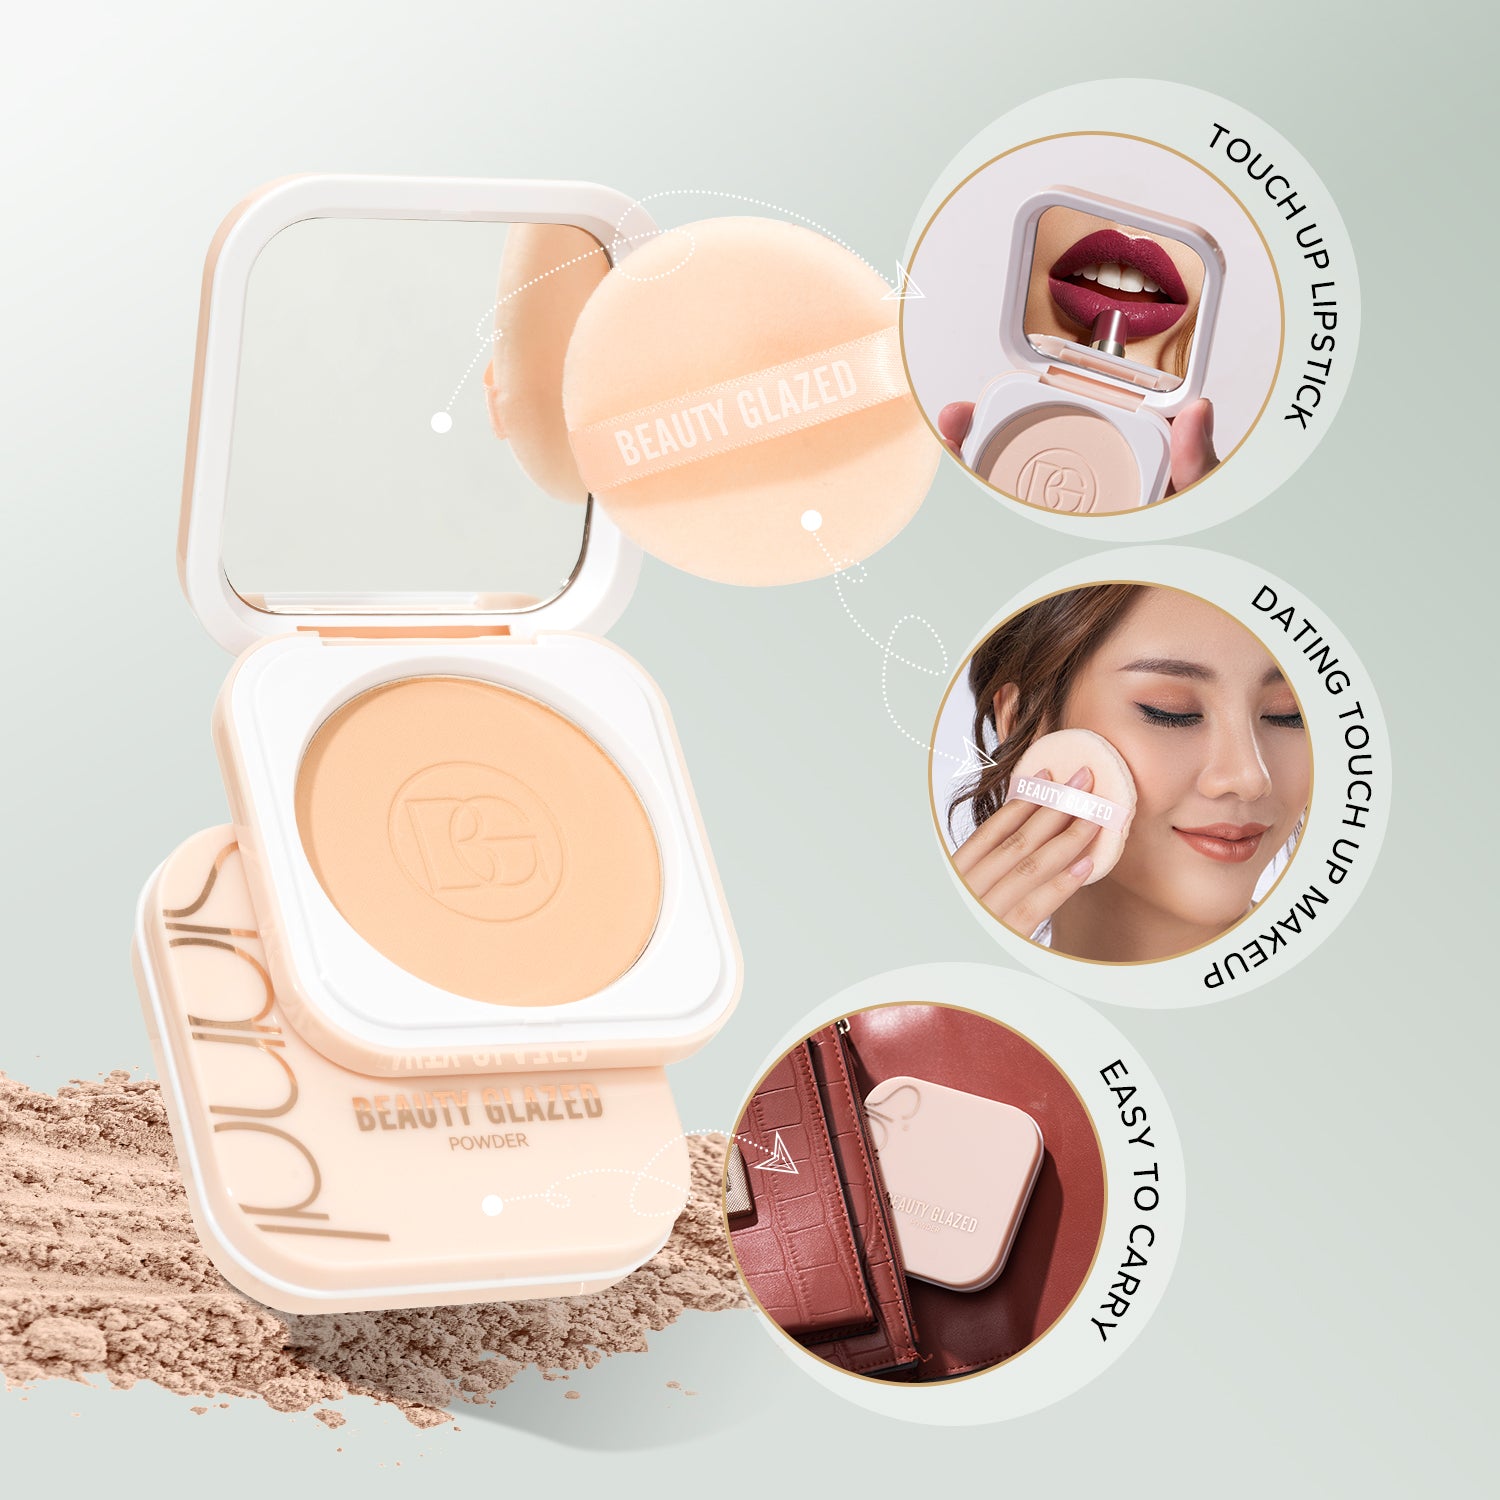 Beauty Glazed Face Powder 24h Oil Control Matte Flawless Full Coverage Velvet Compact Long Lasting Soft Waterproof With Mirror And Puff